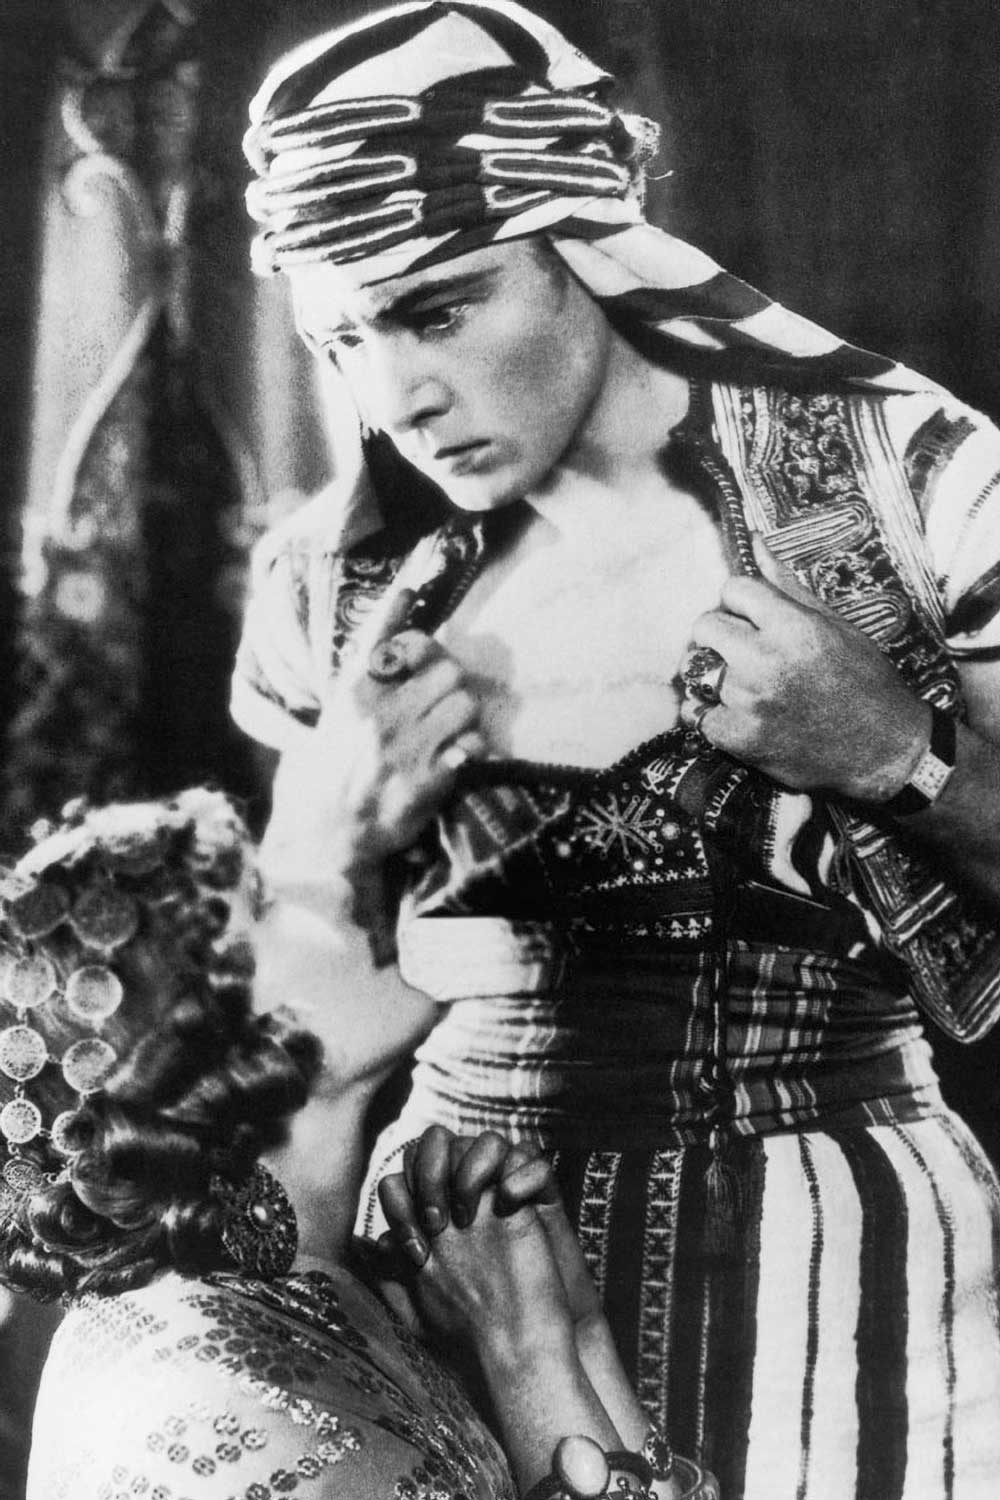 Rudolph Valentino wearing a Tank in 1926’s film The Son of the Sheik